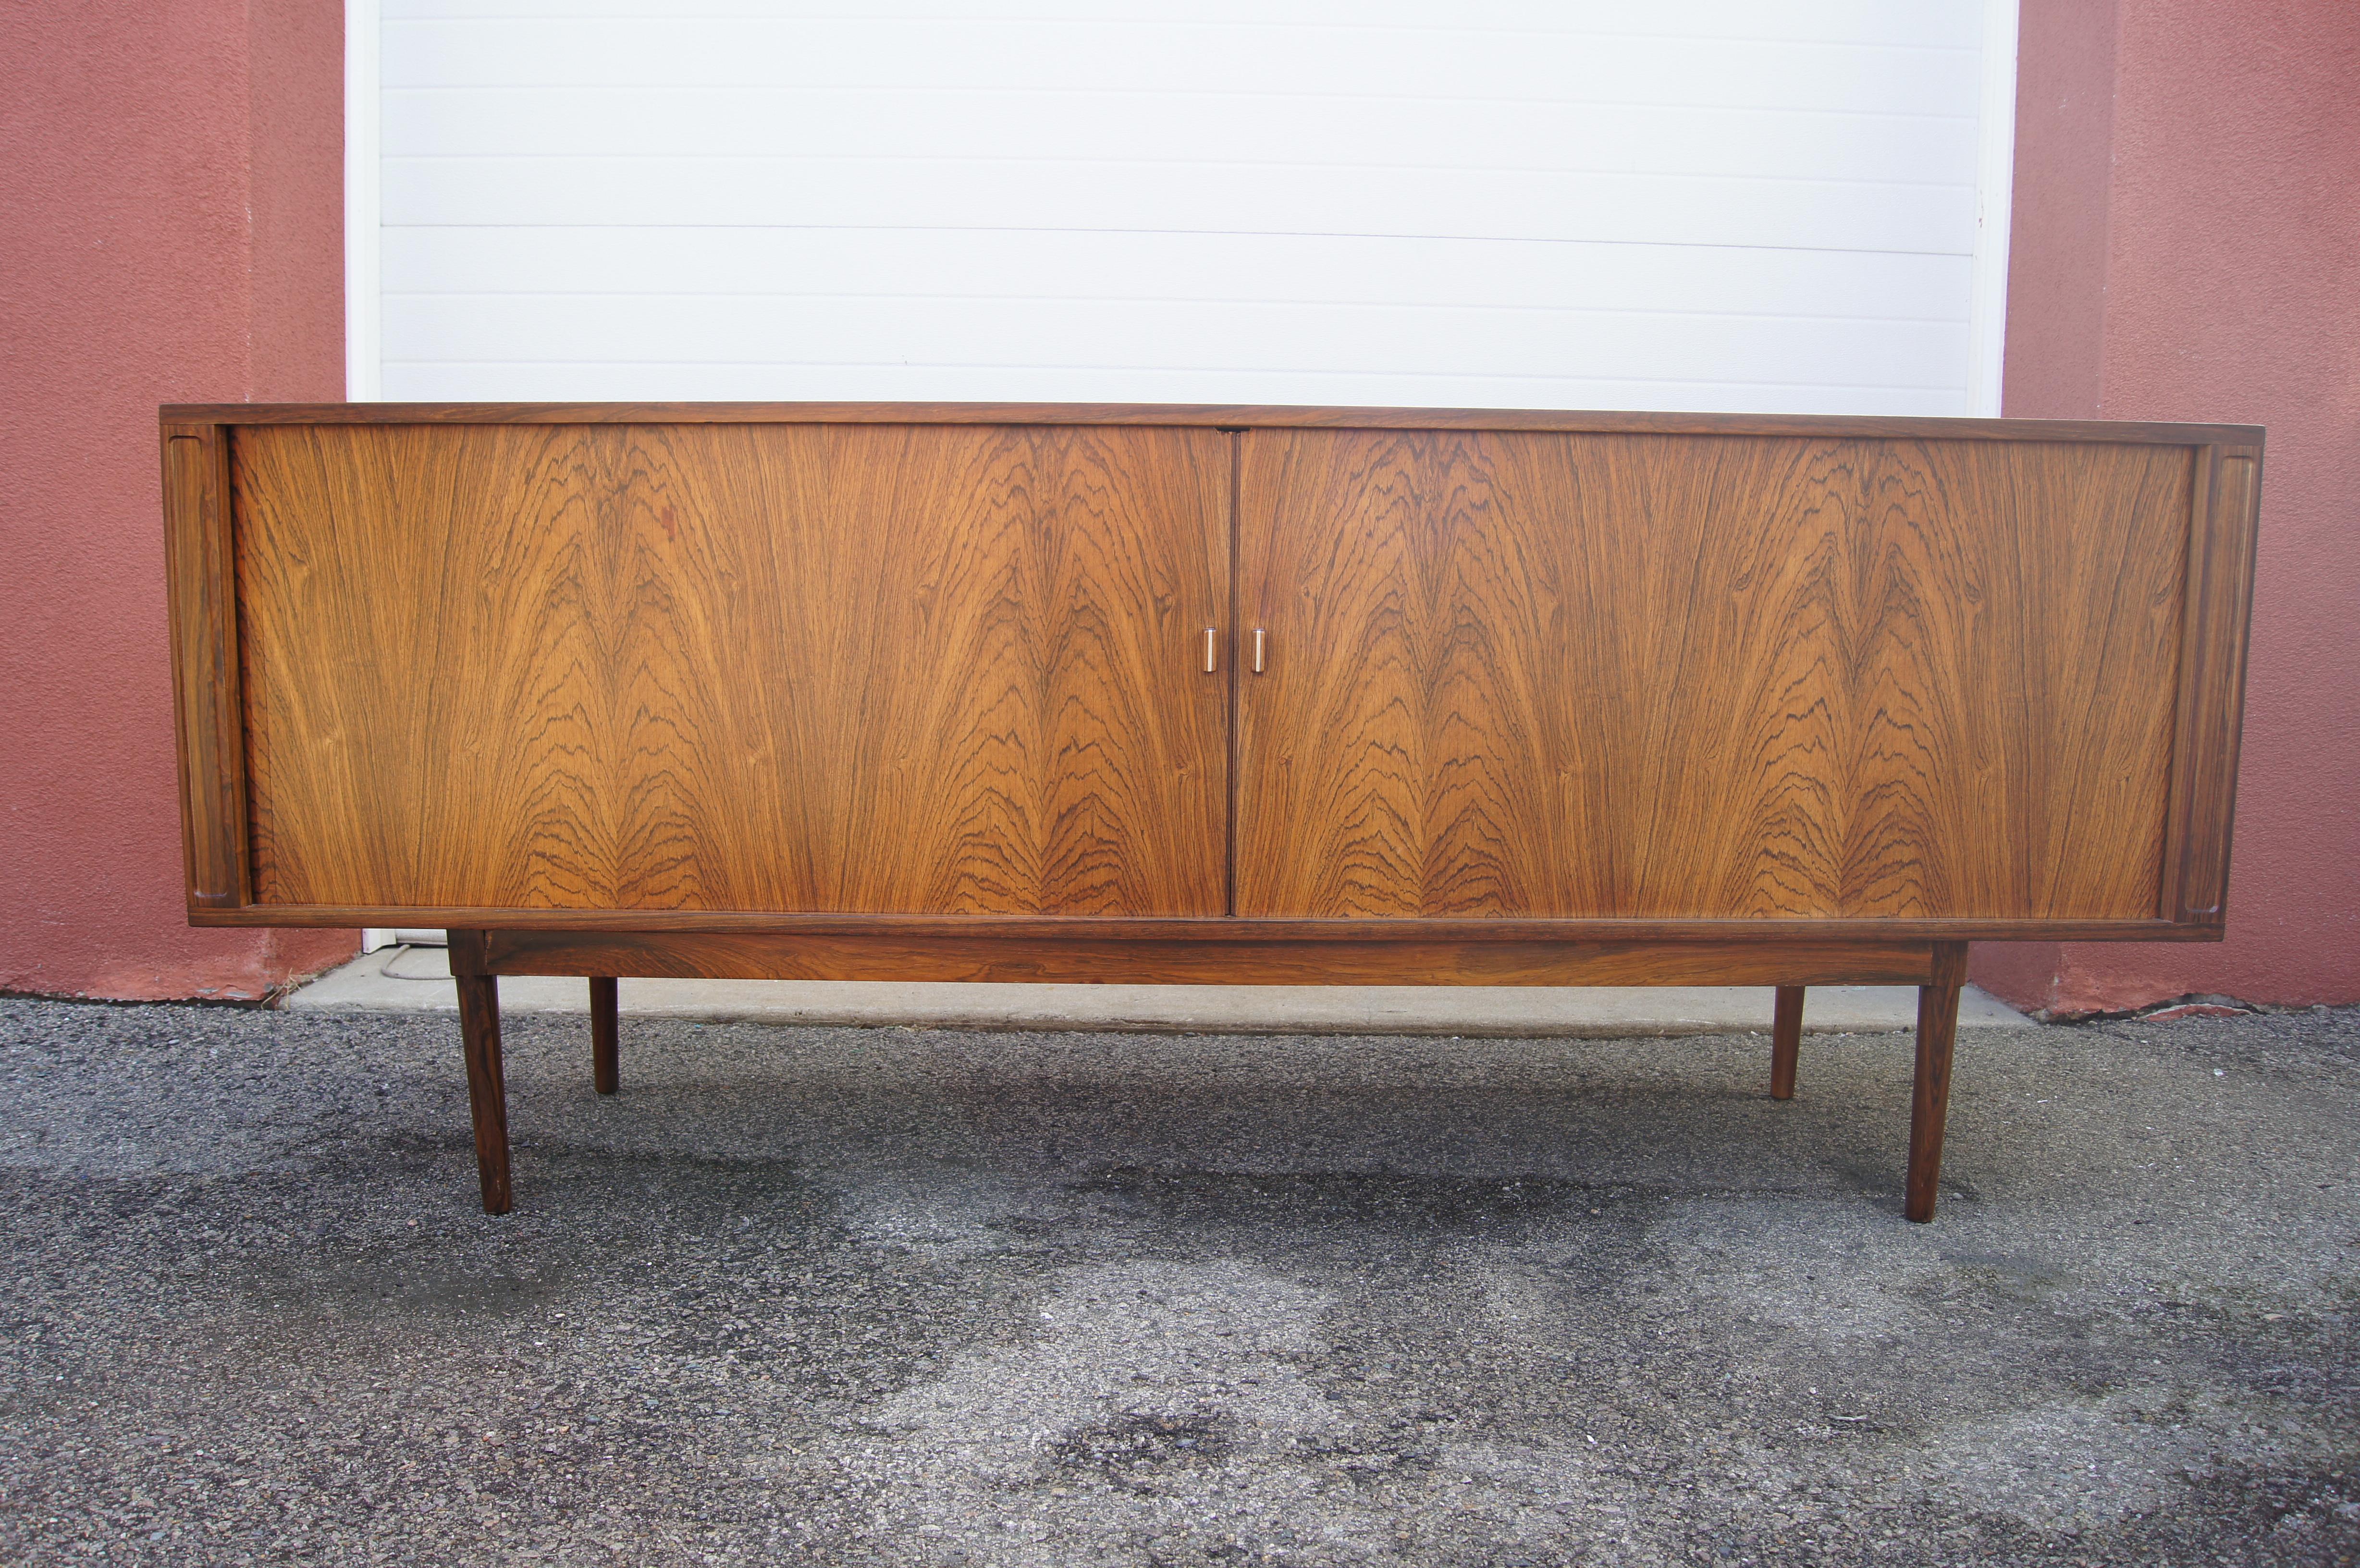 This hard-to-come-by mid-century sideboard was designed Peter Løvig Nielsen for Løvig Dansk. The rosewood frame has book-matched tambour doors that open with minimal pulls. Inside adjustable shelves — one on the left and two on the right — flank